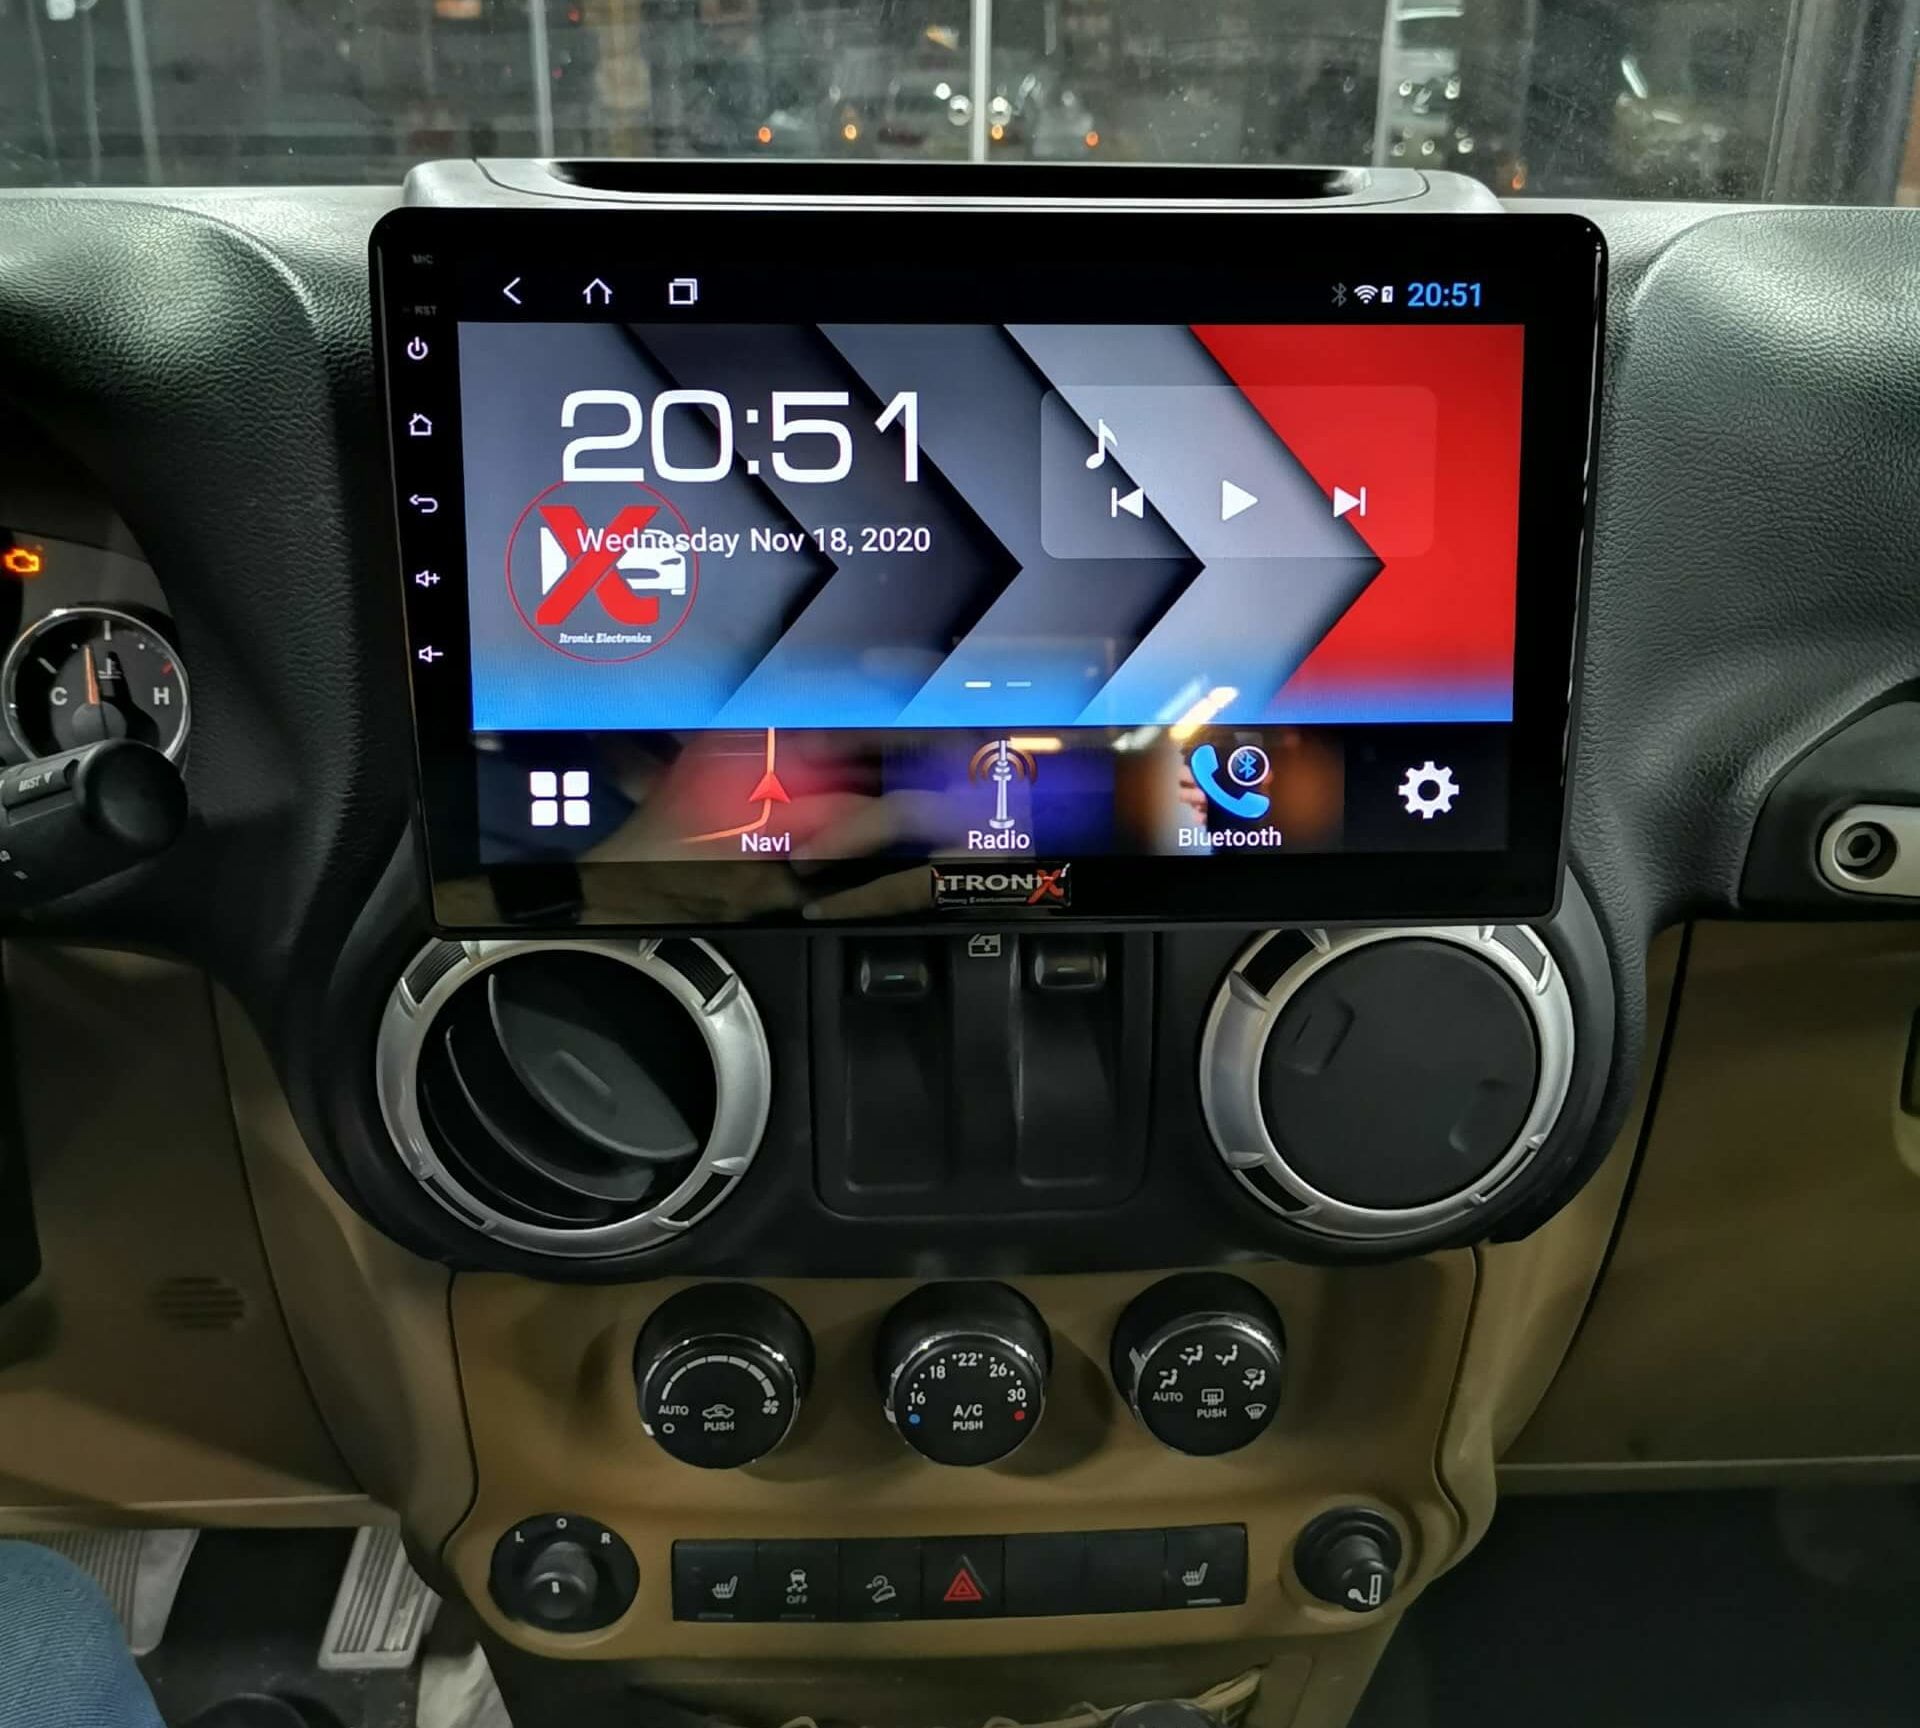 10INCH JEEP WRANGLER JK ANDROID SCREEN - Itronix Electronics